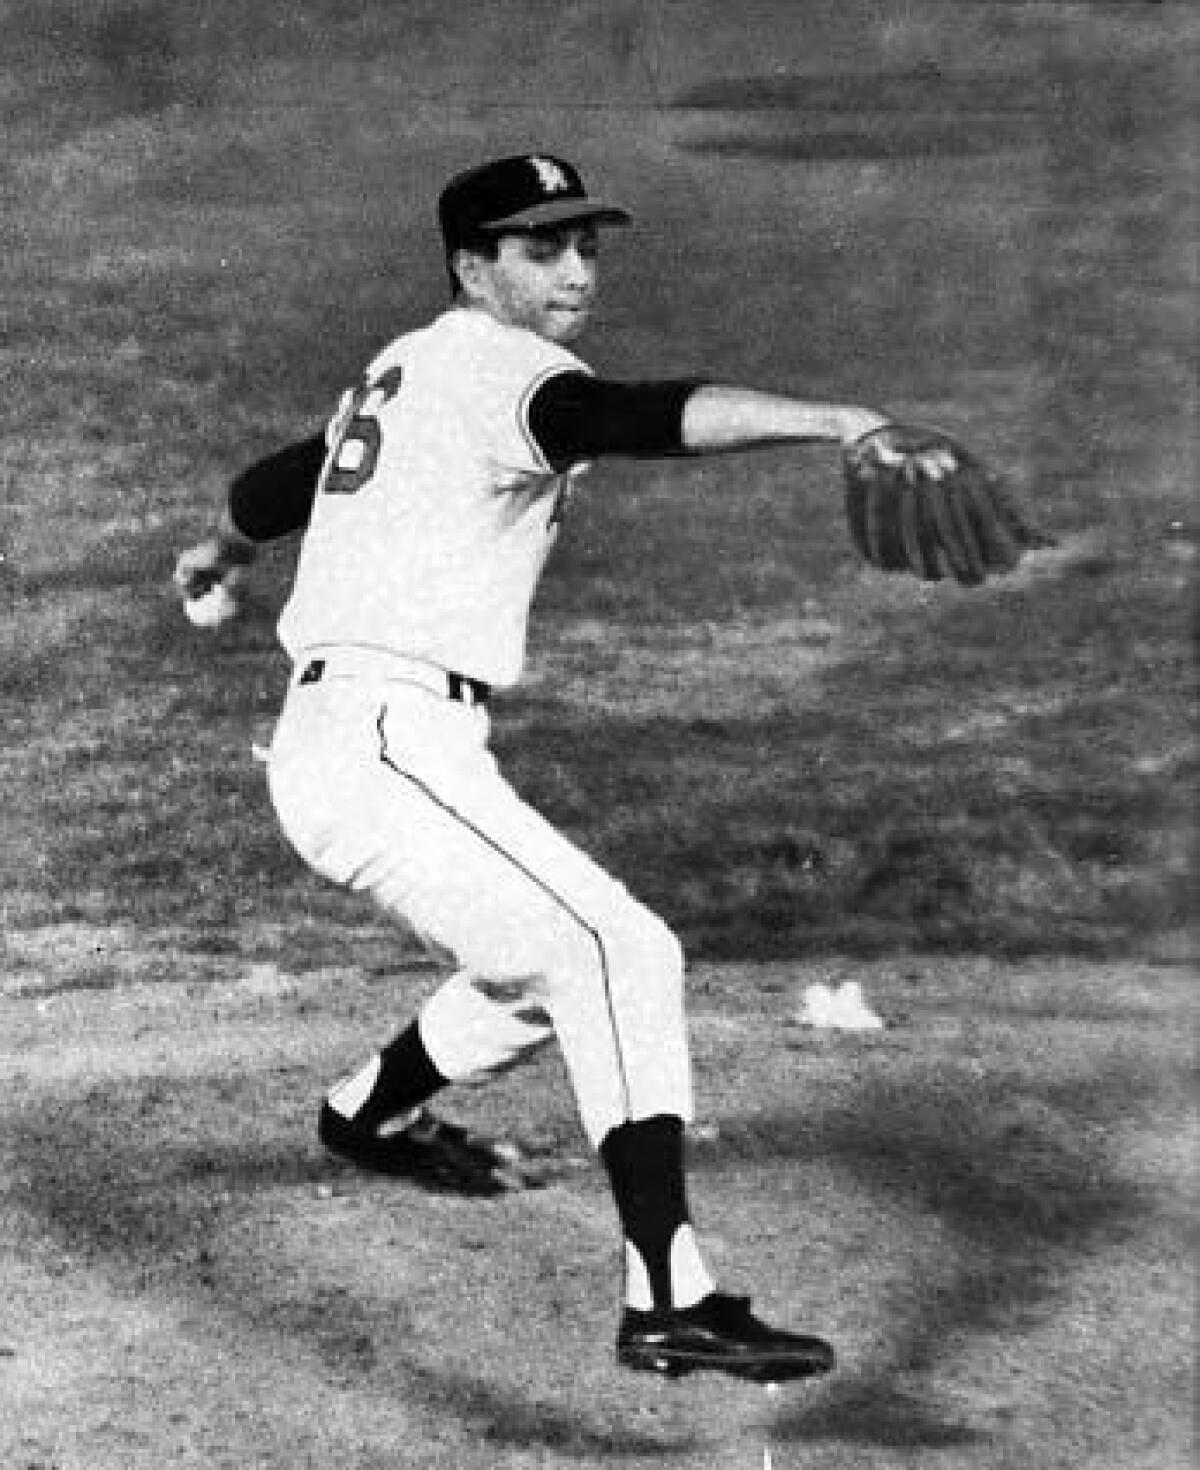 In only his fourth major league start, Bo Belinsky pitched a no-hitter against the Baltimore Orioles on May 5, 1962.